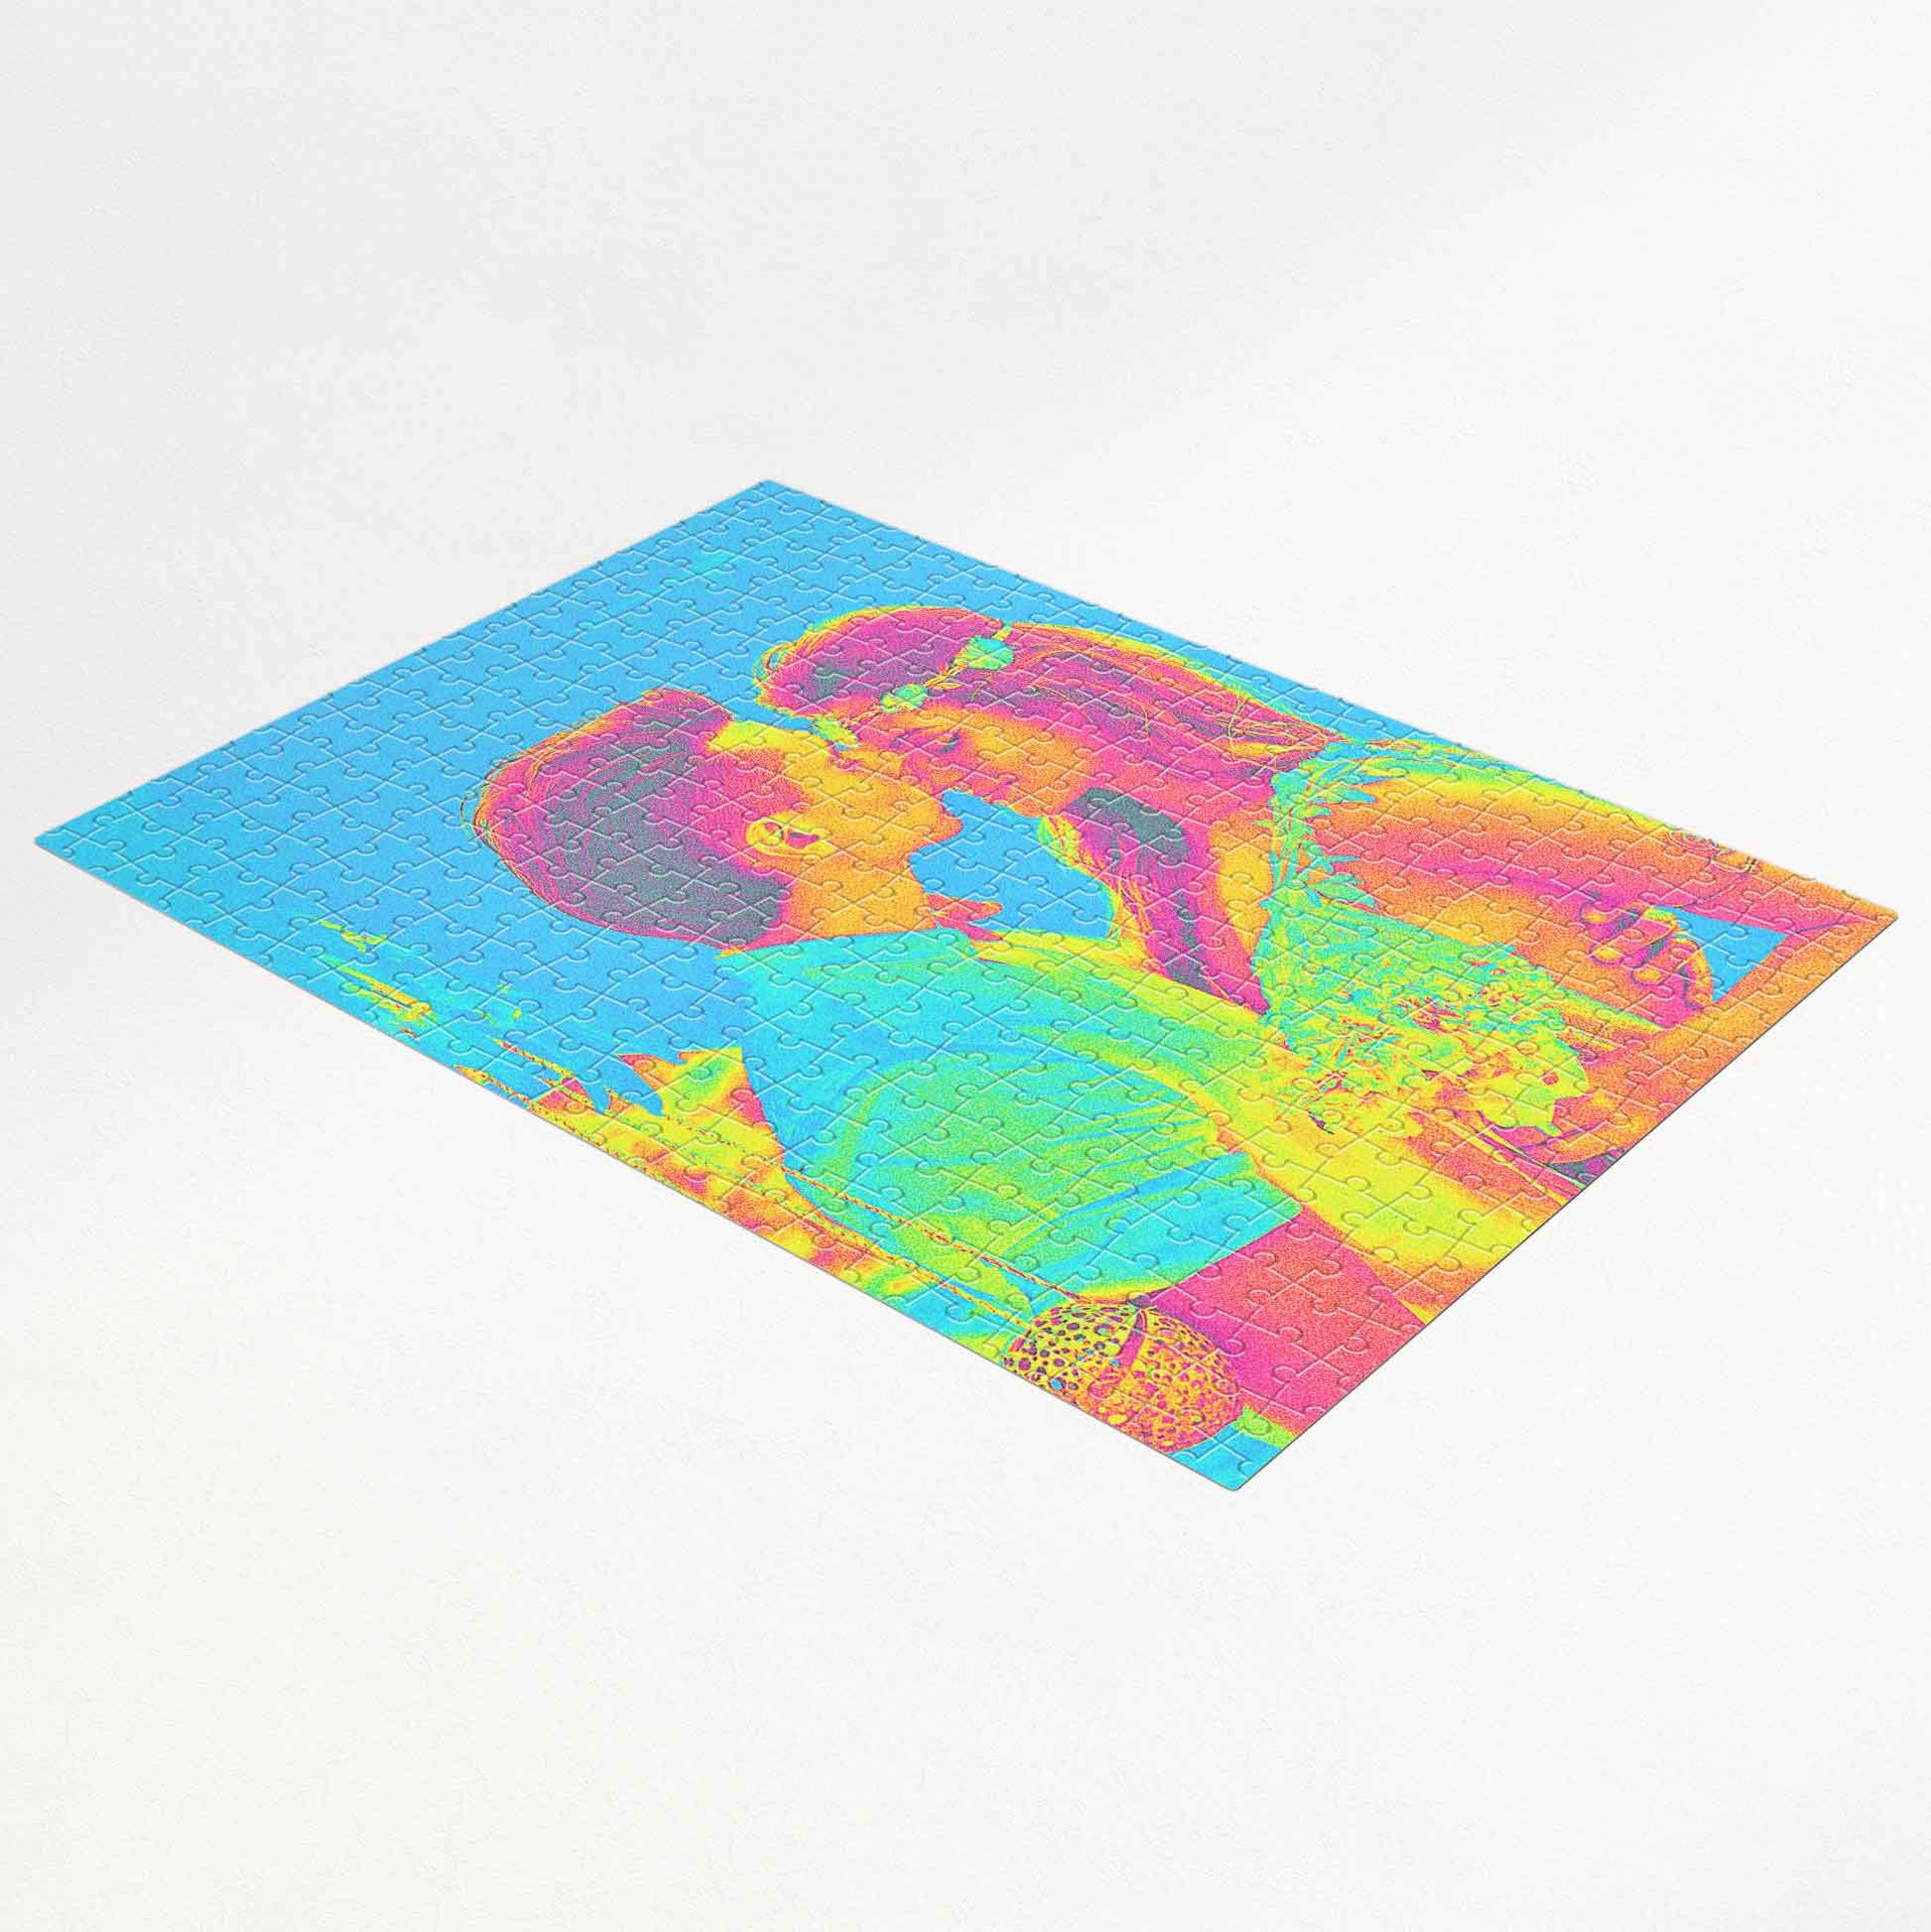 Personalised Acid Trip Jigsaw Puzzle - an imaginative delight. Print from photo, featuring edgy acid colors effect in blue, green, and pink hues. Handmade and trendy, it's a cool and fresh gift for friends and family